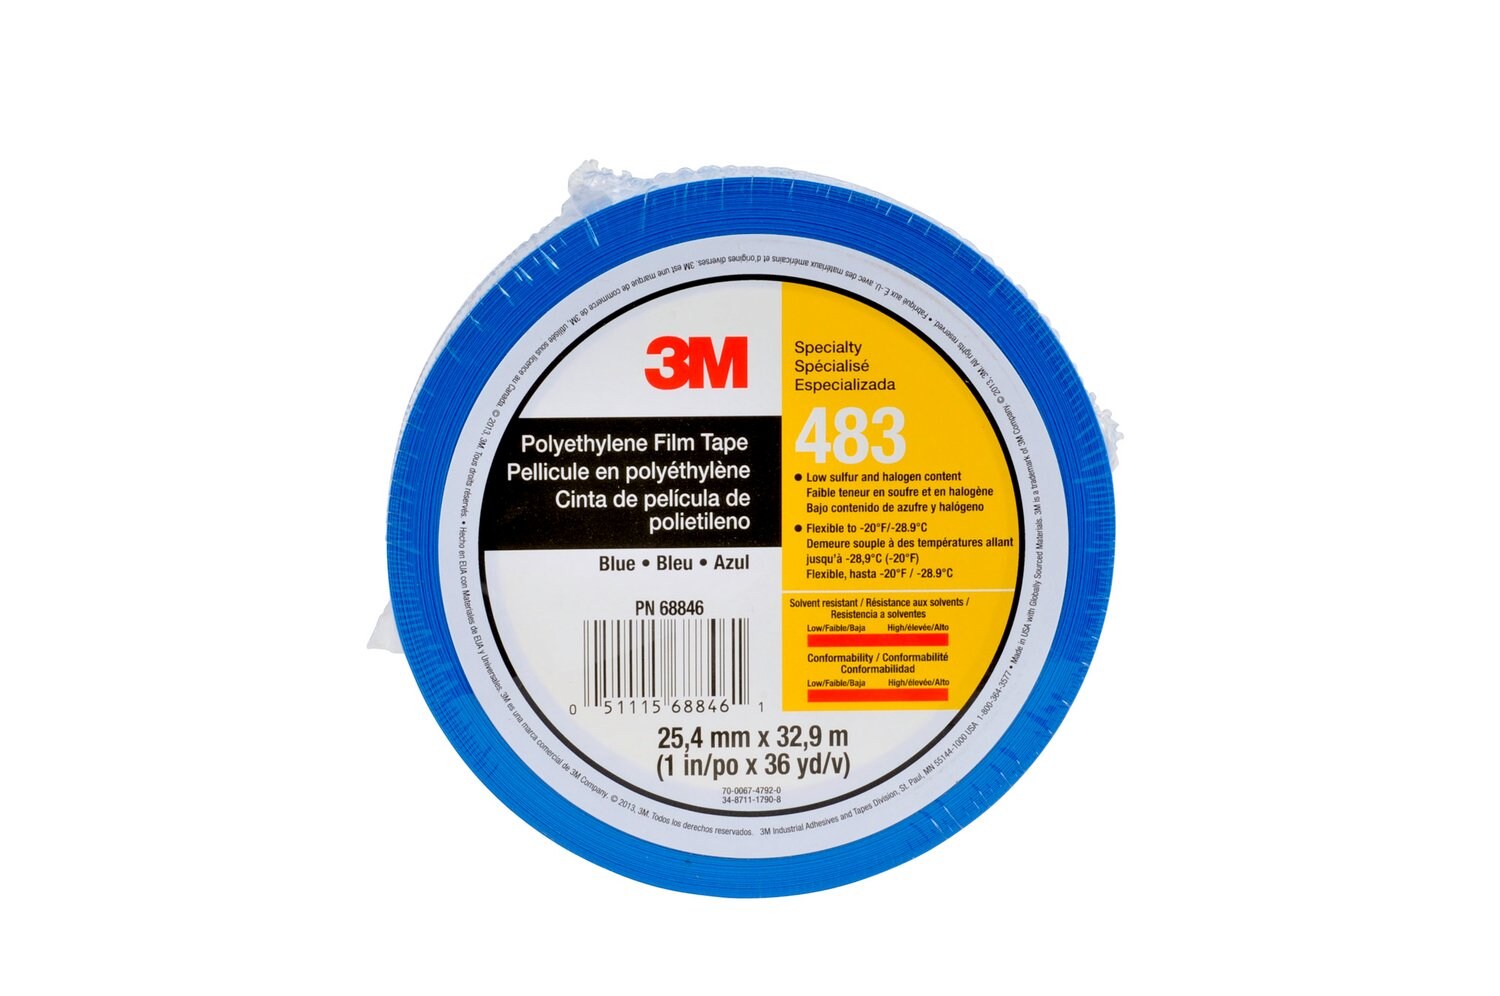 7010295458 - 3M Polyethylene Tape 483, Blue, 1 in x 36 yd, 5.0 mil, 36 rolls per
case, Individually Wrapped Conveniently Packaged